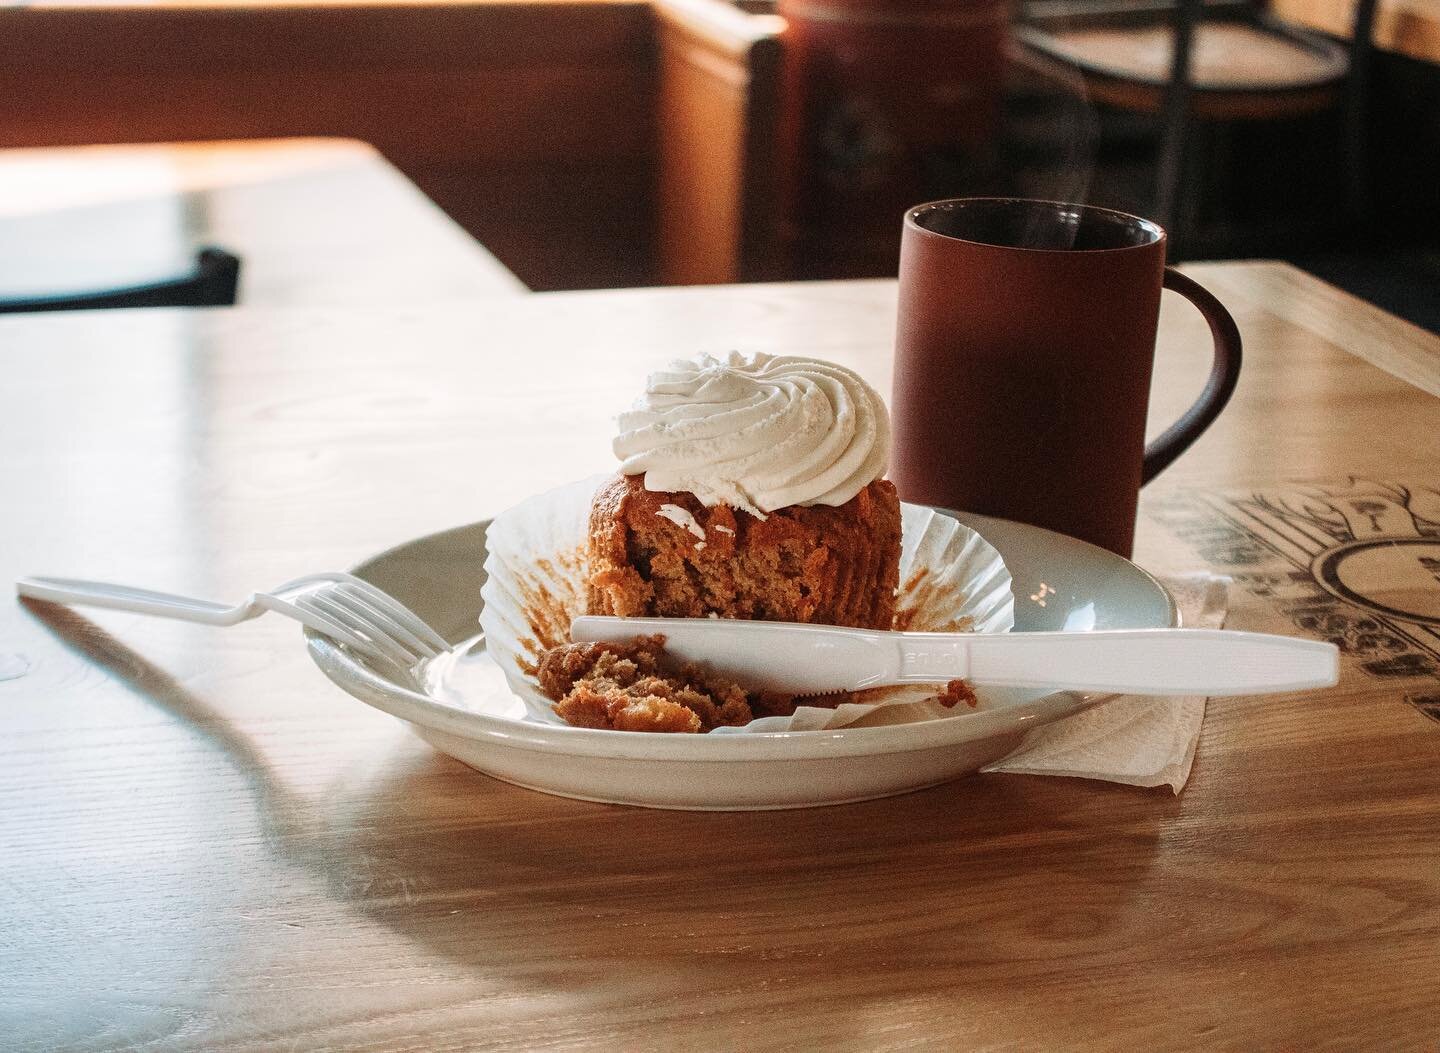 Savor every bite this weekend. 🧁